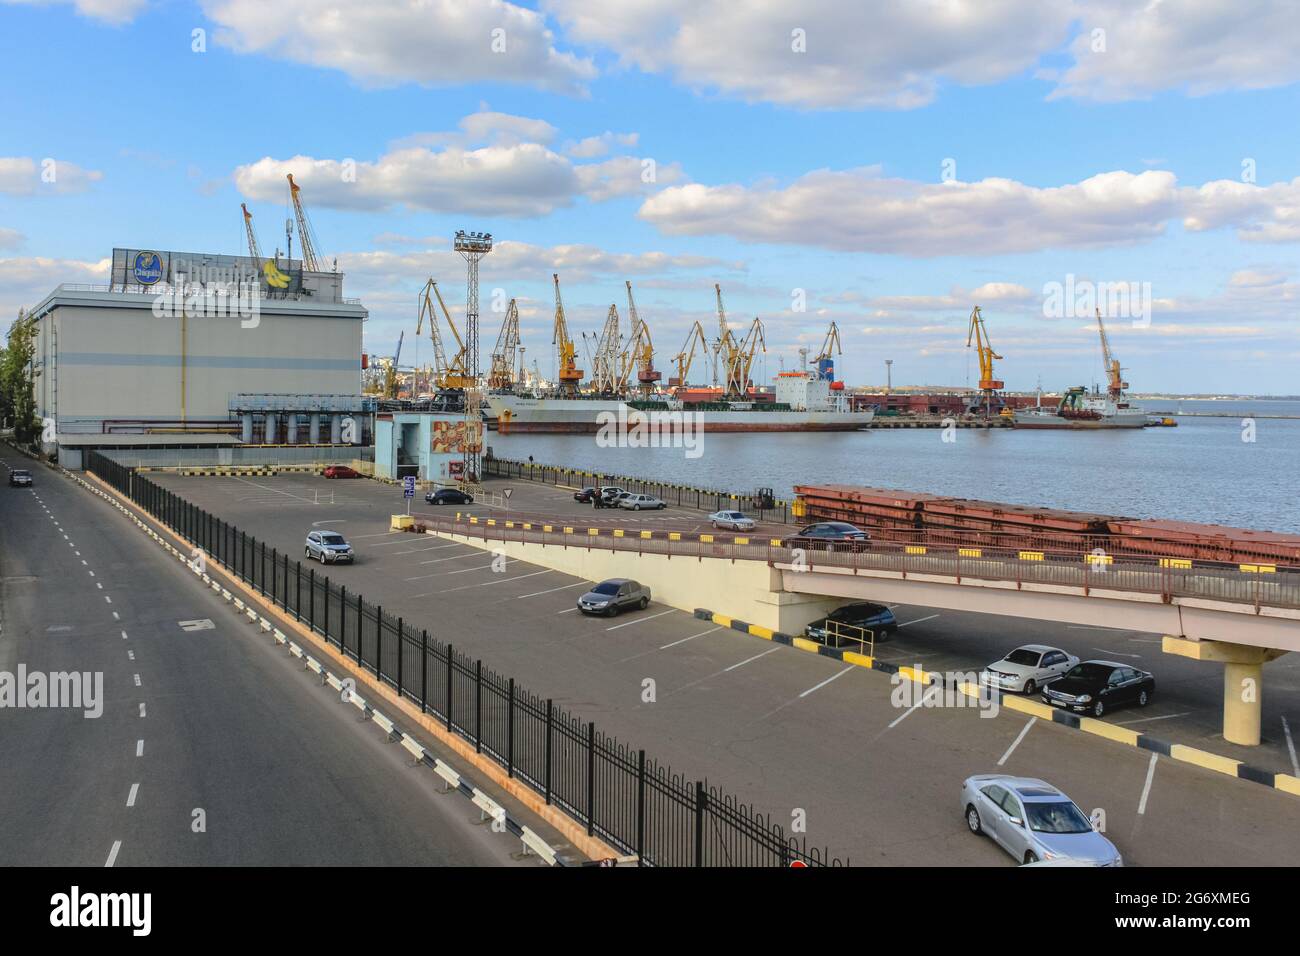 Odessa, Ukraine, October 9, 2012: The building of the Odessa commercial sea port with cranes, a ship and a parking lot in the foreground Stock Photo